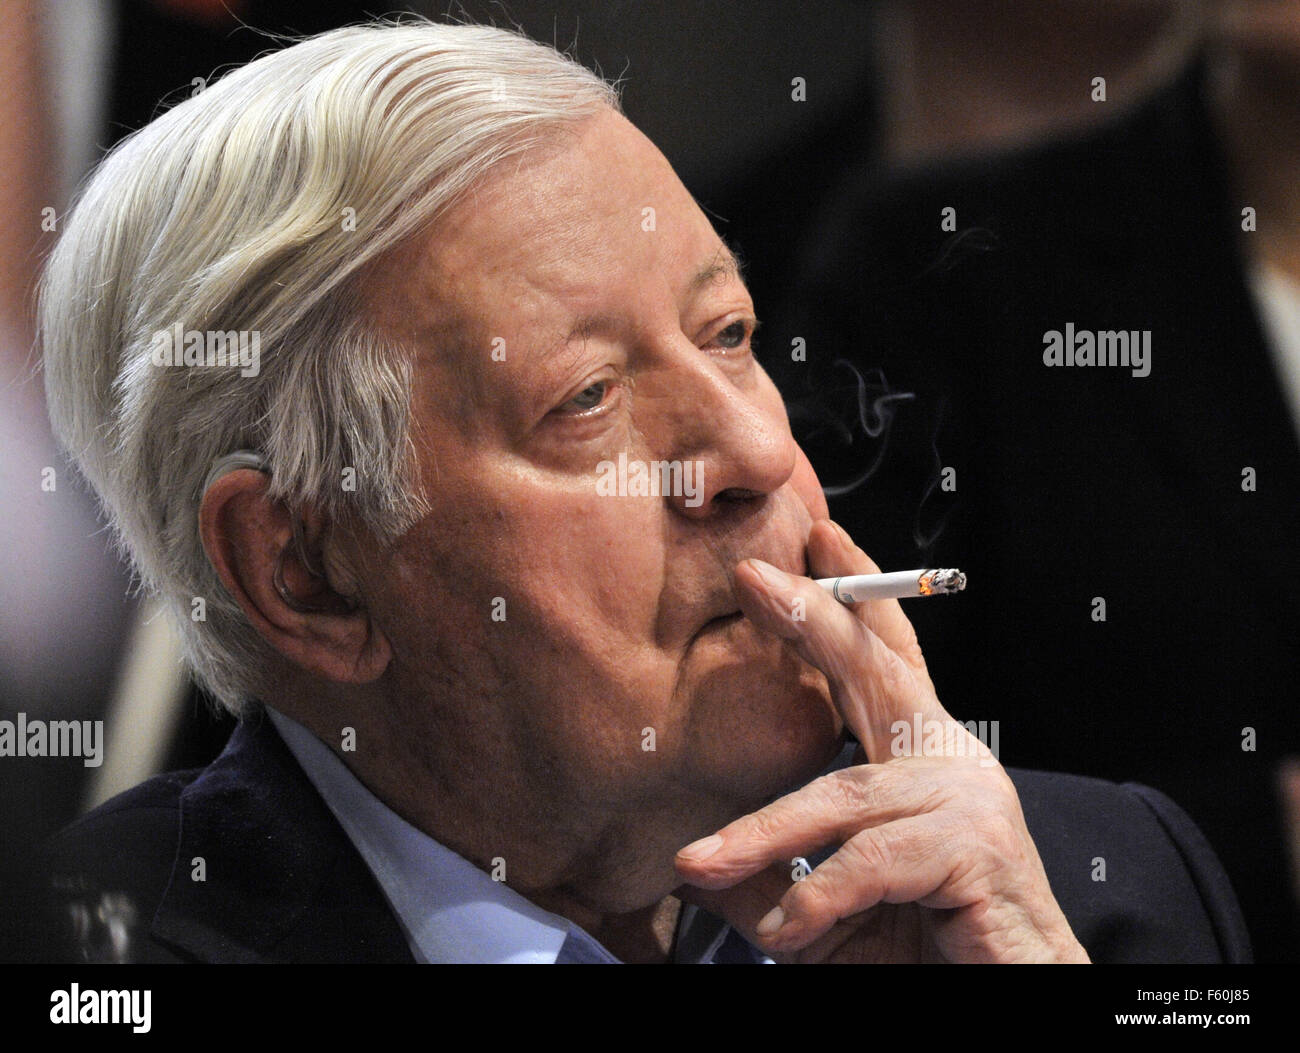 FILE - A file picture dated 18.10.2008 shows former German chancellor Helmut Schmidt smoking a cigarette during a SPD party meeting in Berlin, Germany. PHOTO: RAINER JENSEN DPA/LBN Stock Photo